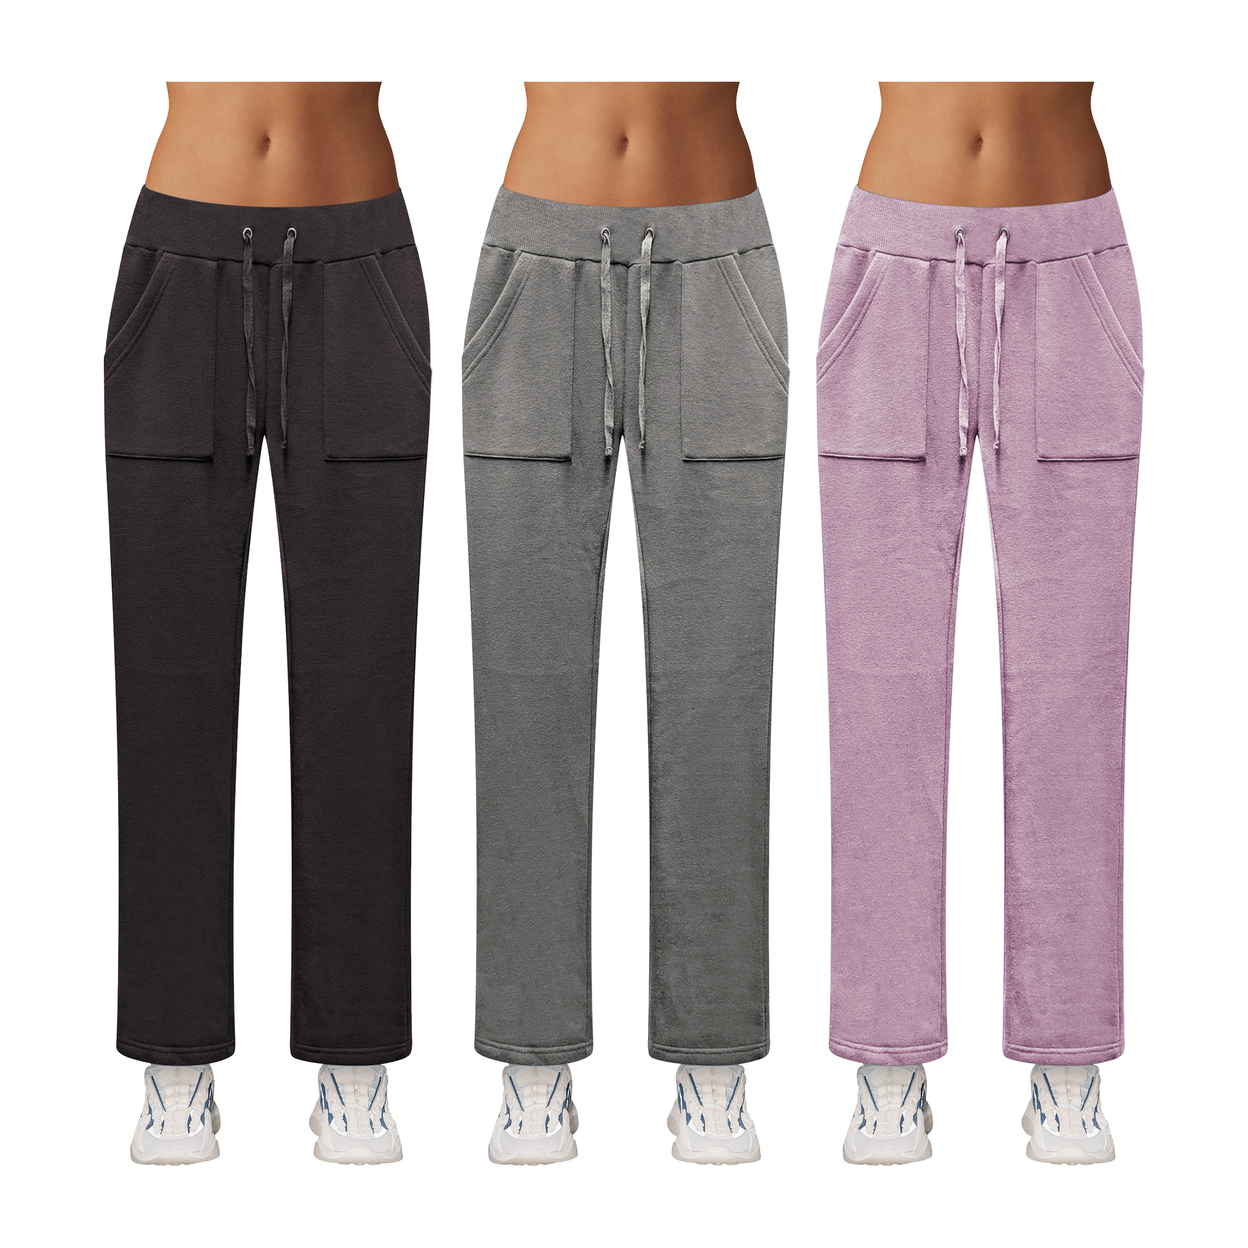 Multi-Pack: Women's Ultra-Soft Cozy Fleece Lined Elastic Waistband Terry Knit Pants - 1-Pack, X-large